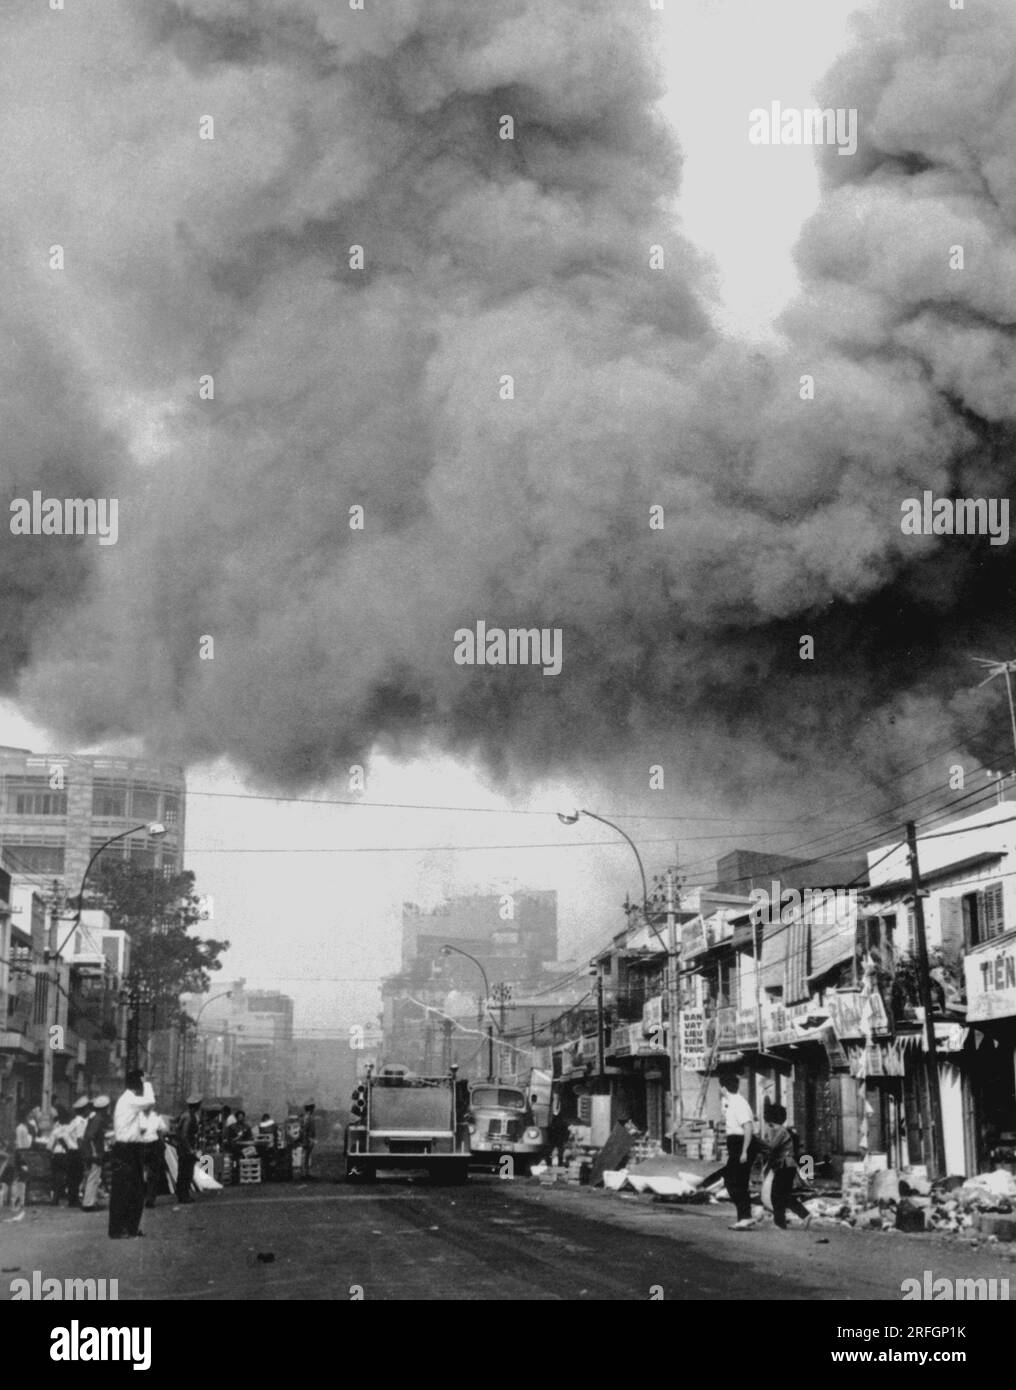 SAIGON, VIETNAM - circa 31 January 1968 - Black smoke covers areas of the capital city and fire trucks rush to the scenes of fires set during attacks Stock Photo